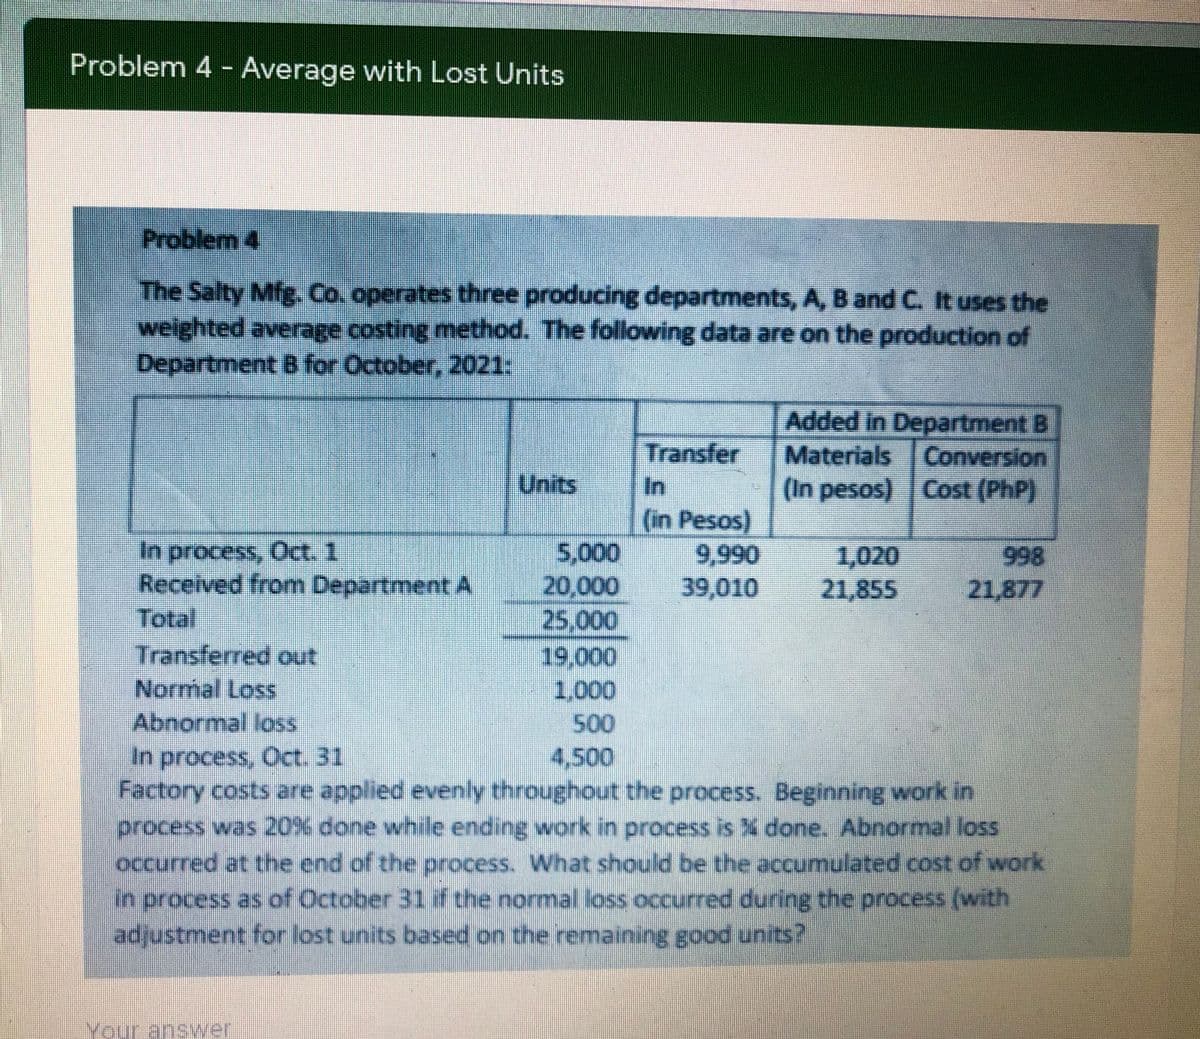 Problem 4 - Average with Lost Units
Problem 4
The Salty Mfg. Co. operates three producing departments, A, B and C. It uses the
weighted average costing method. The following data are on the production of
Department B for October, 2021:
Transfer
In
Added in Department B
Materials Conversion
(In pesos) Cost (PhP)
Units
in Pesos)
In process, Oct. 1
Received from Department A
Total
5,000
20,000
25,000
19,000
1,000
9,990
39,010
1,020
21,855
998
21,877
Transferred out
Normal Loss
Abnormal loss
In process, Oct. 31
Factory costs are applied evenly throughout the process. Beginning work in
process was 20% done while ending work in process is X done. Abnormal loss
occurred at the end of the process. What should be the accumulated cost of work
in process as of October 31 if the normal loss occurred during the process (with
adjustment for lost units based on the remaining good units?
4,500
Your answer
